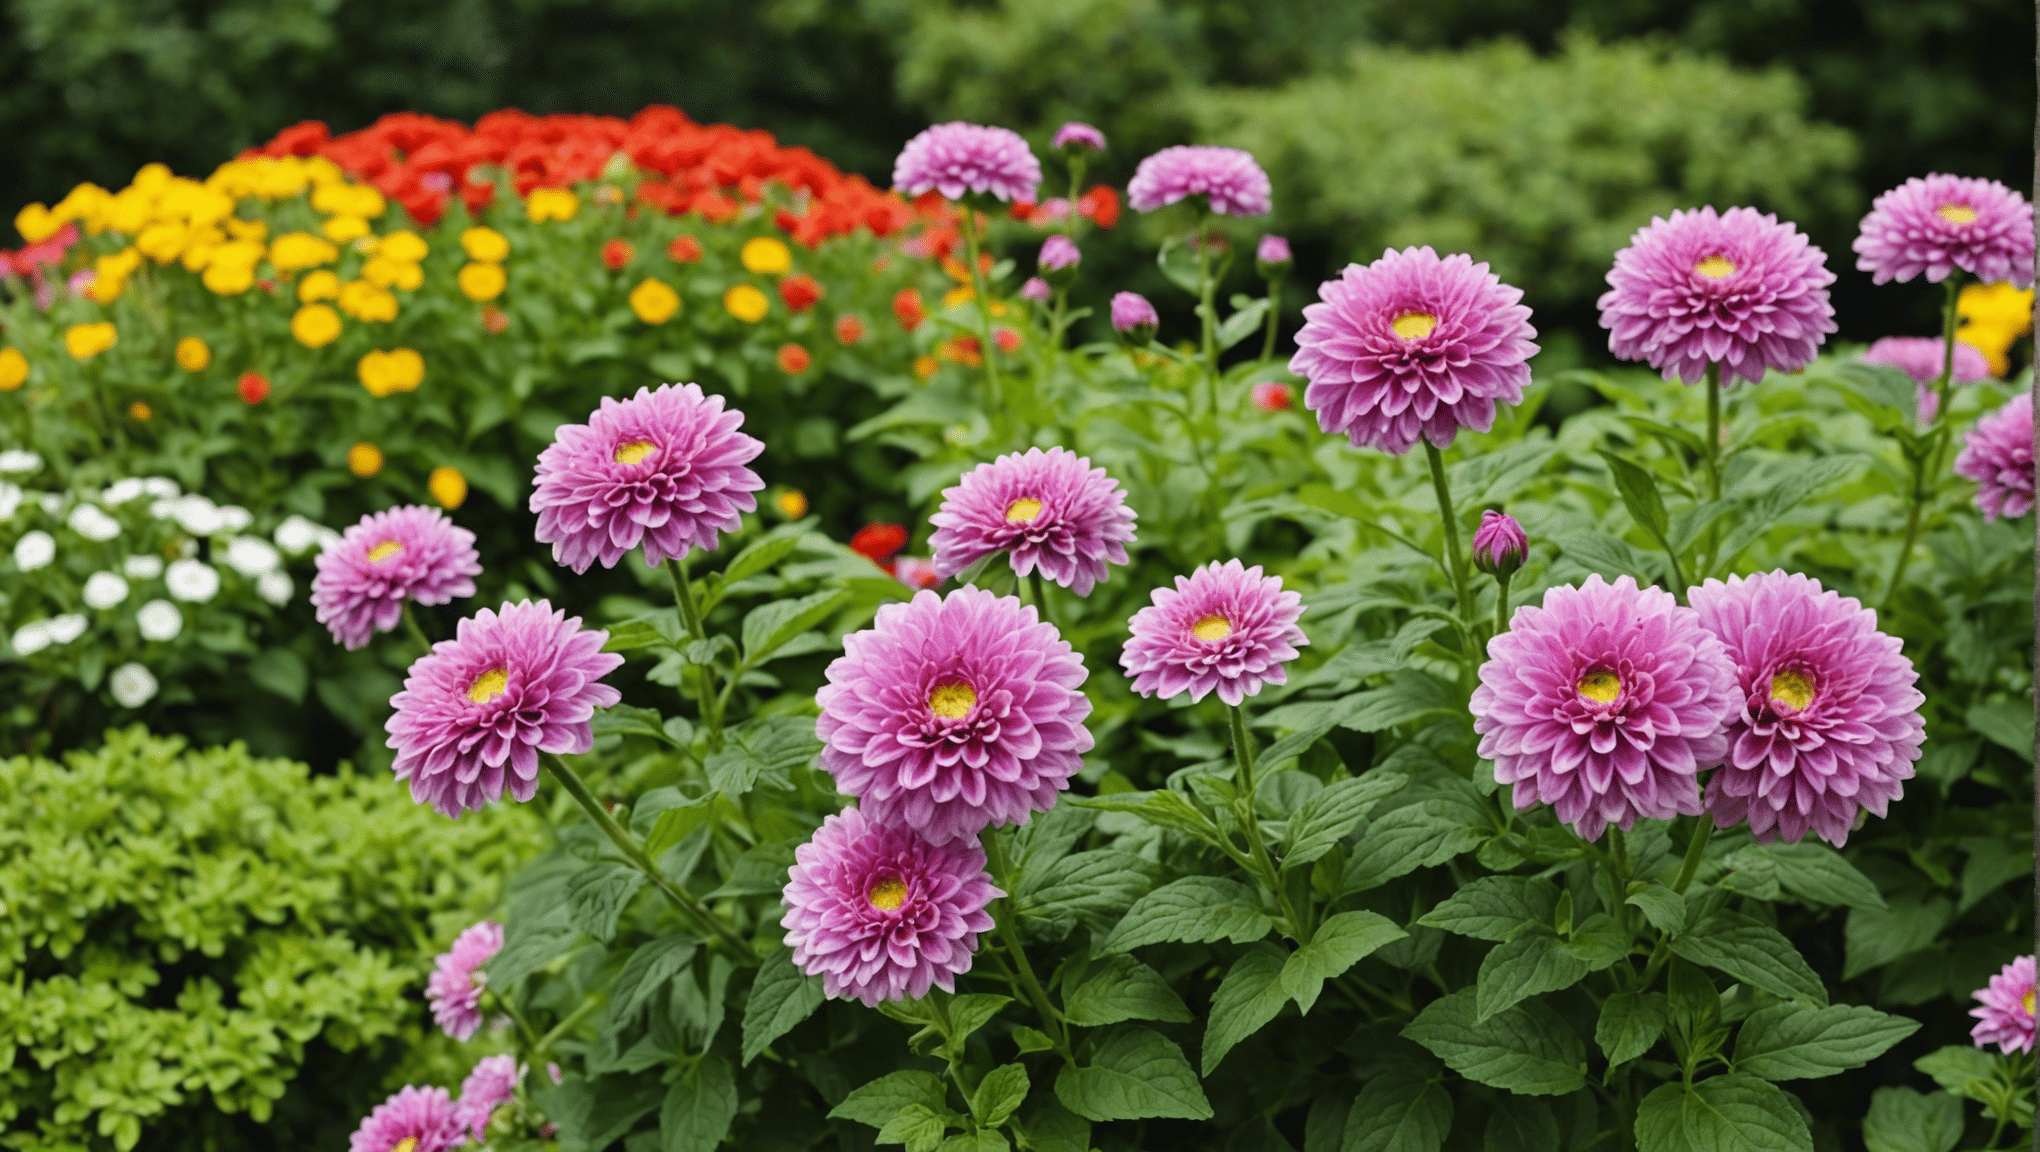 discover the benefits of mum seeds and how they can enhance your garden. learn about how these seeds can help your plants thrive and create a vibrant garden environment.